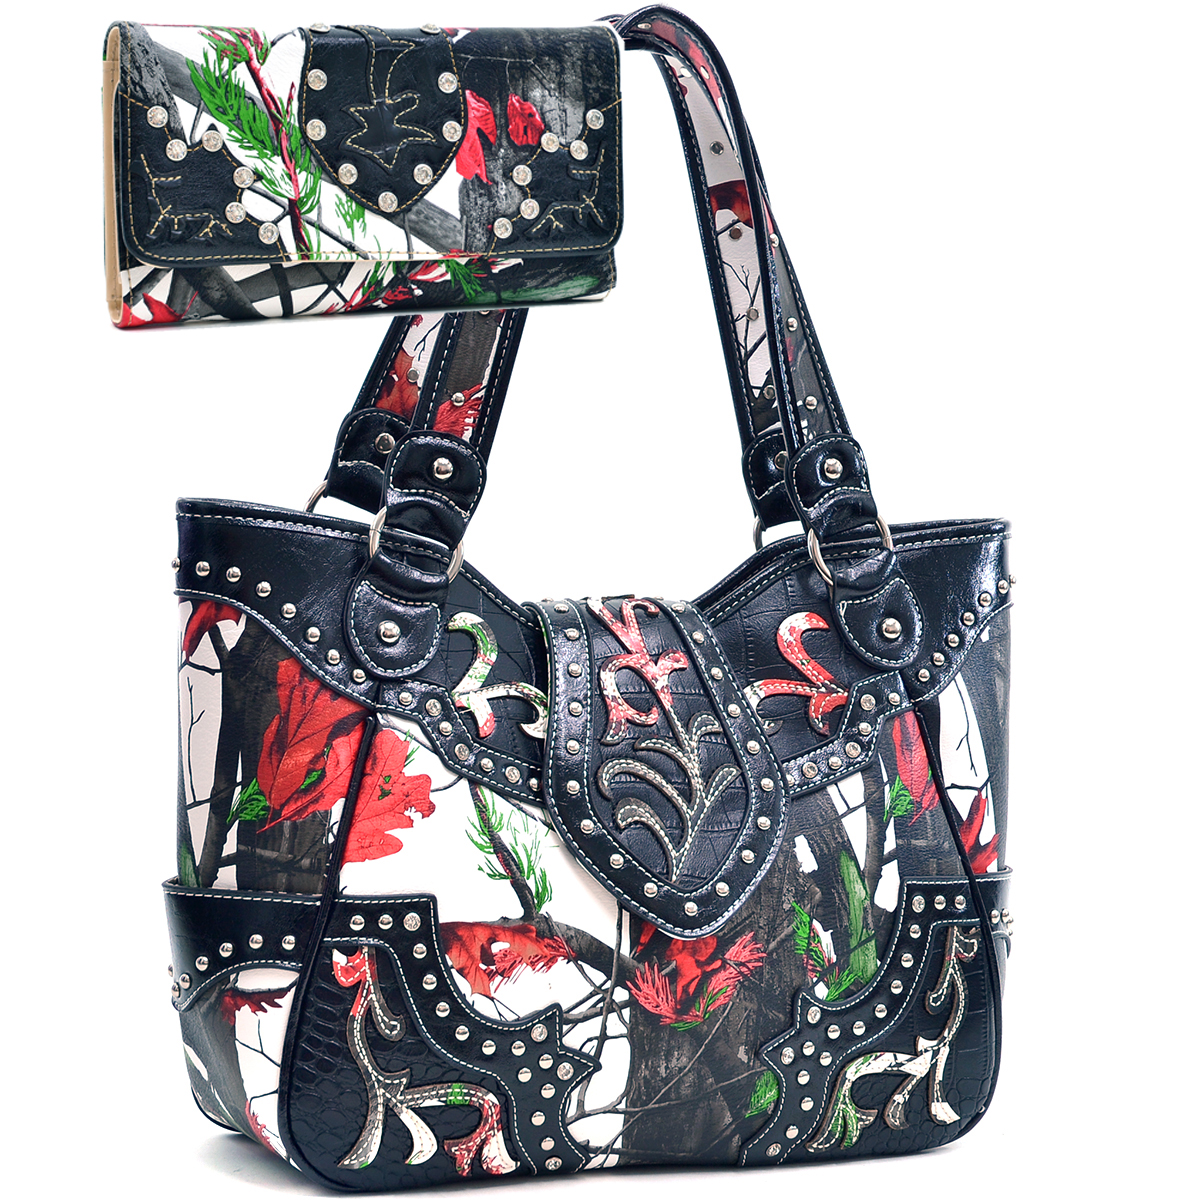 Bt945wb45set-rd & Cam Western Rhinestone Bling Shoulder Bag With Matching Wallet - Red & Camouflage